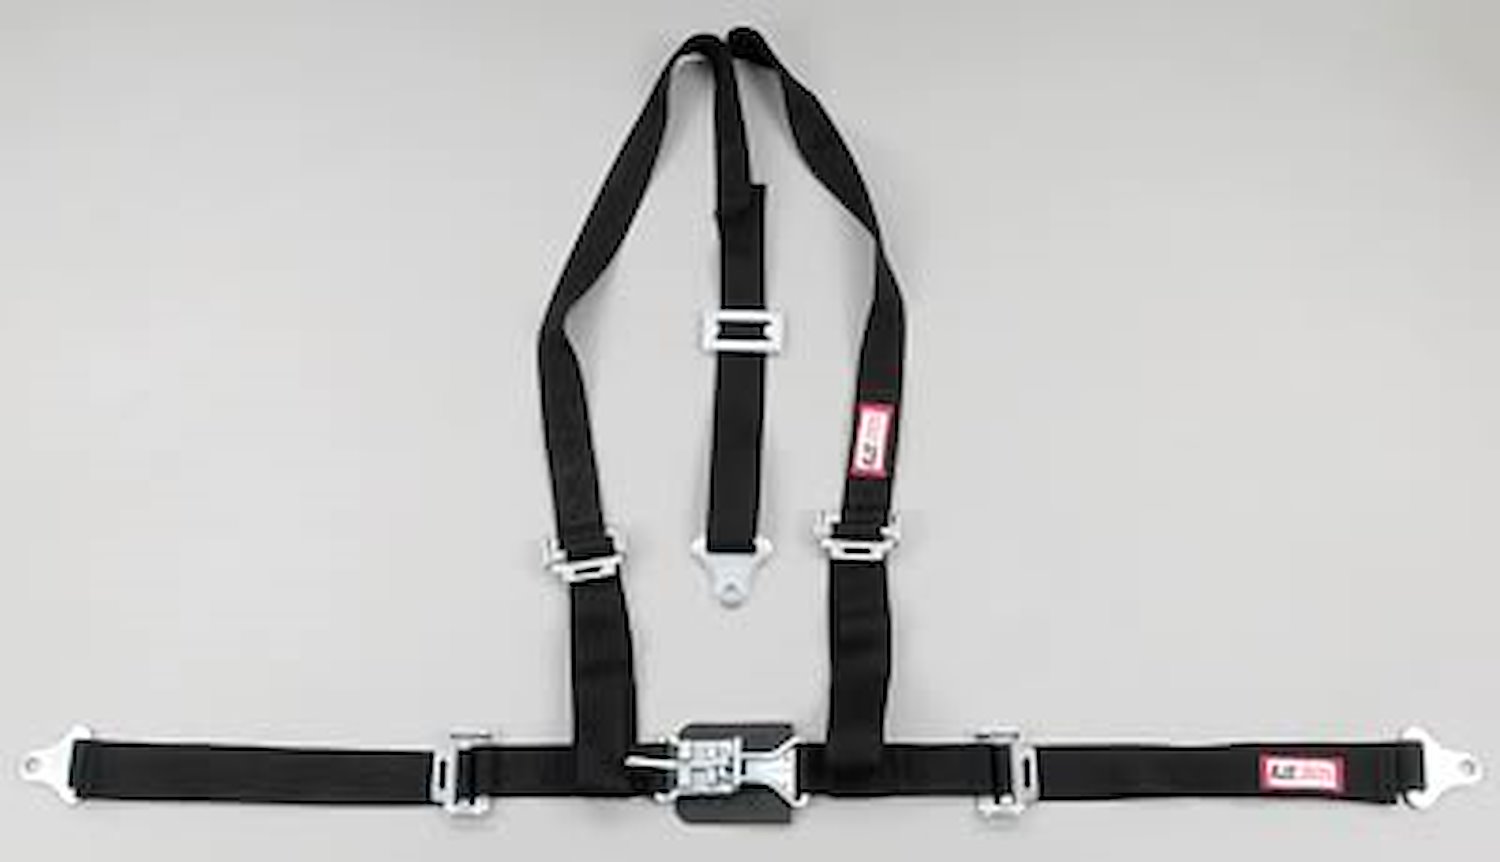 NON-SFI L&L HARNESS 3 PULL DOWN Lap Belt SEWN IN 2 Shoulder Harness V ROLL BAR Mount w/STERNUM STRAP ALL SNAP ENDS RED